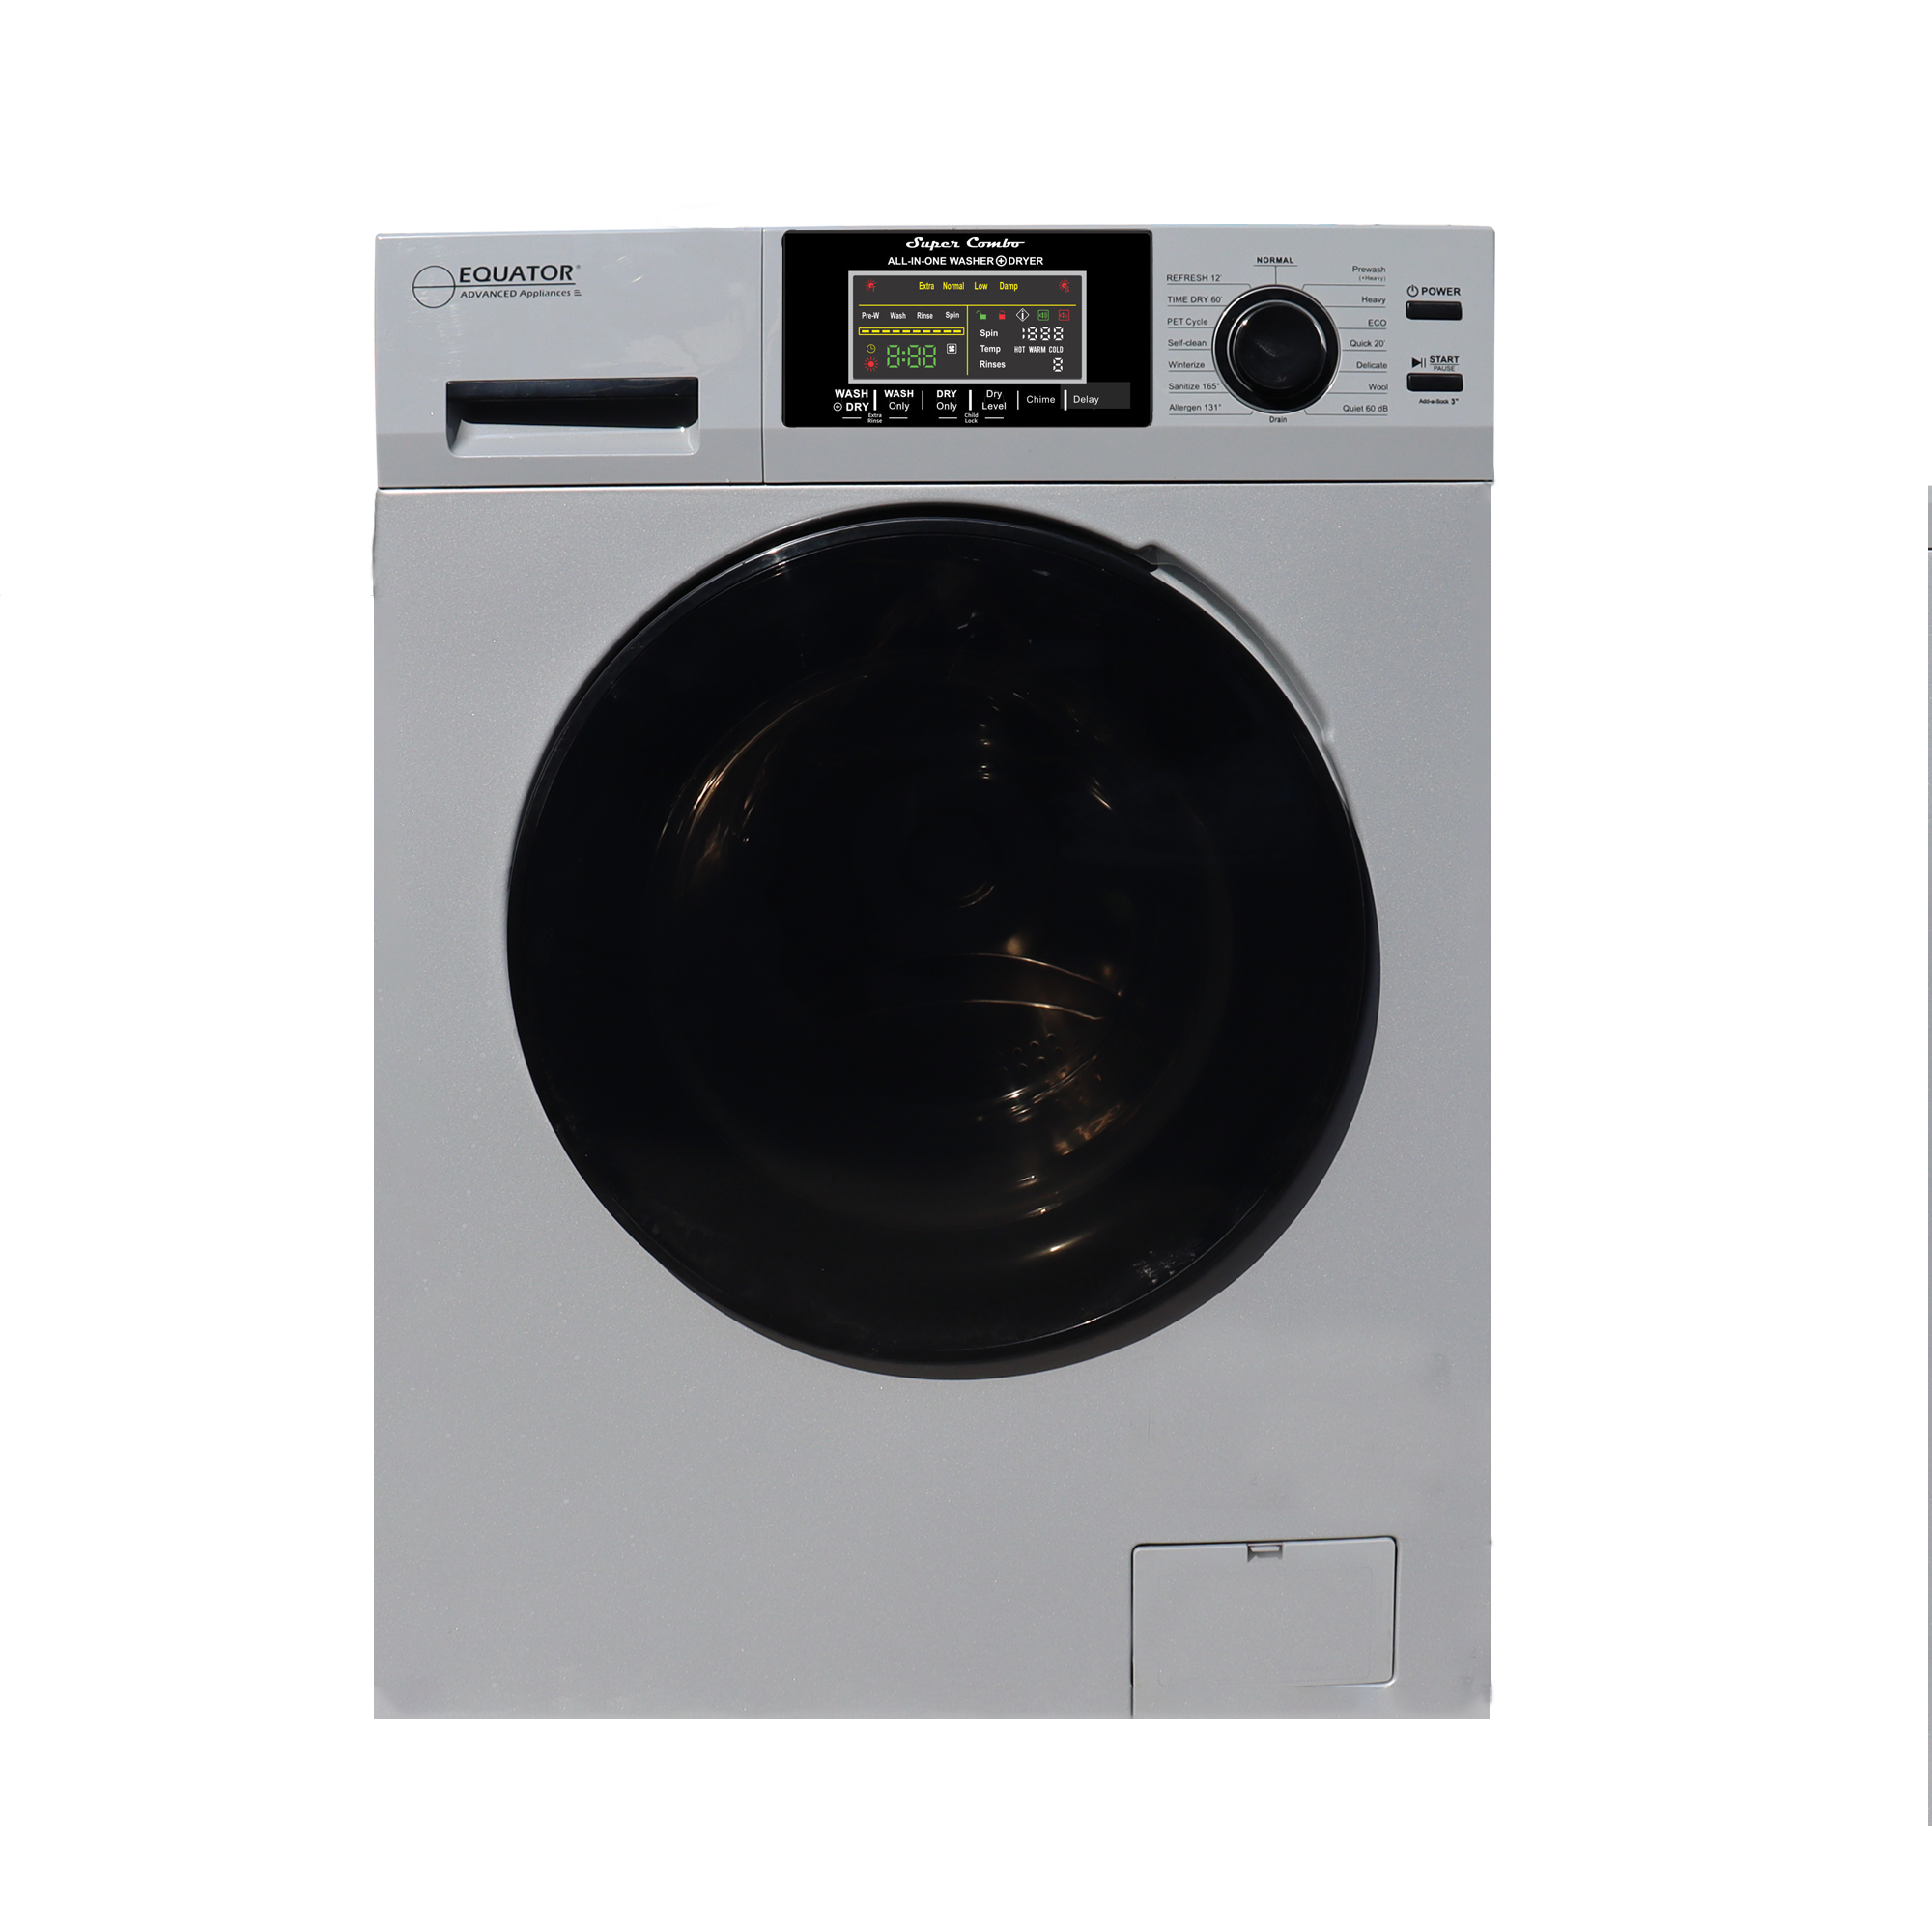 Equator Combo Washer Dryer VENTED-DRY 30% Faster than Condense 110V 15lb 1400RPM in Silver